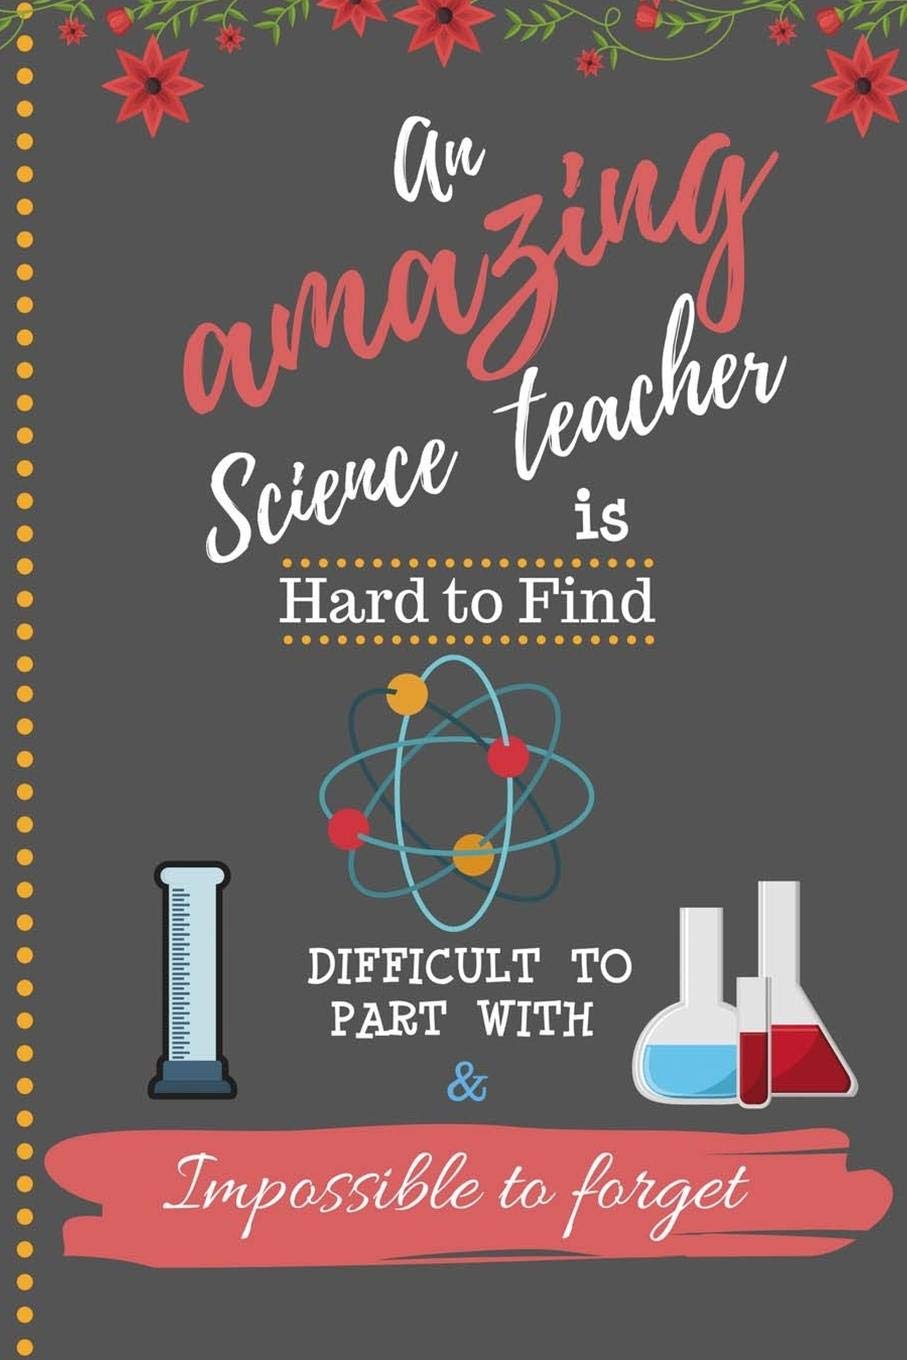 An Amazing Science Teacher is Hard to Find Difficult to Part With & Impossible to Forget: Cute Notebook Journal Gift for Teachers Appreciation, Thank. Christmas and Coworkers Gift Ideas